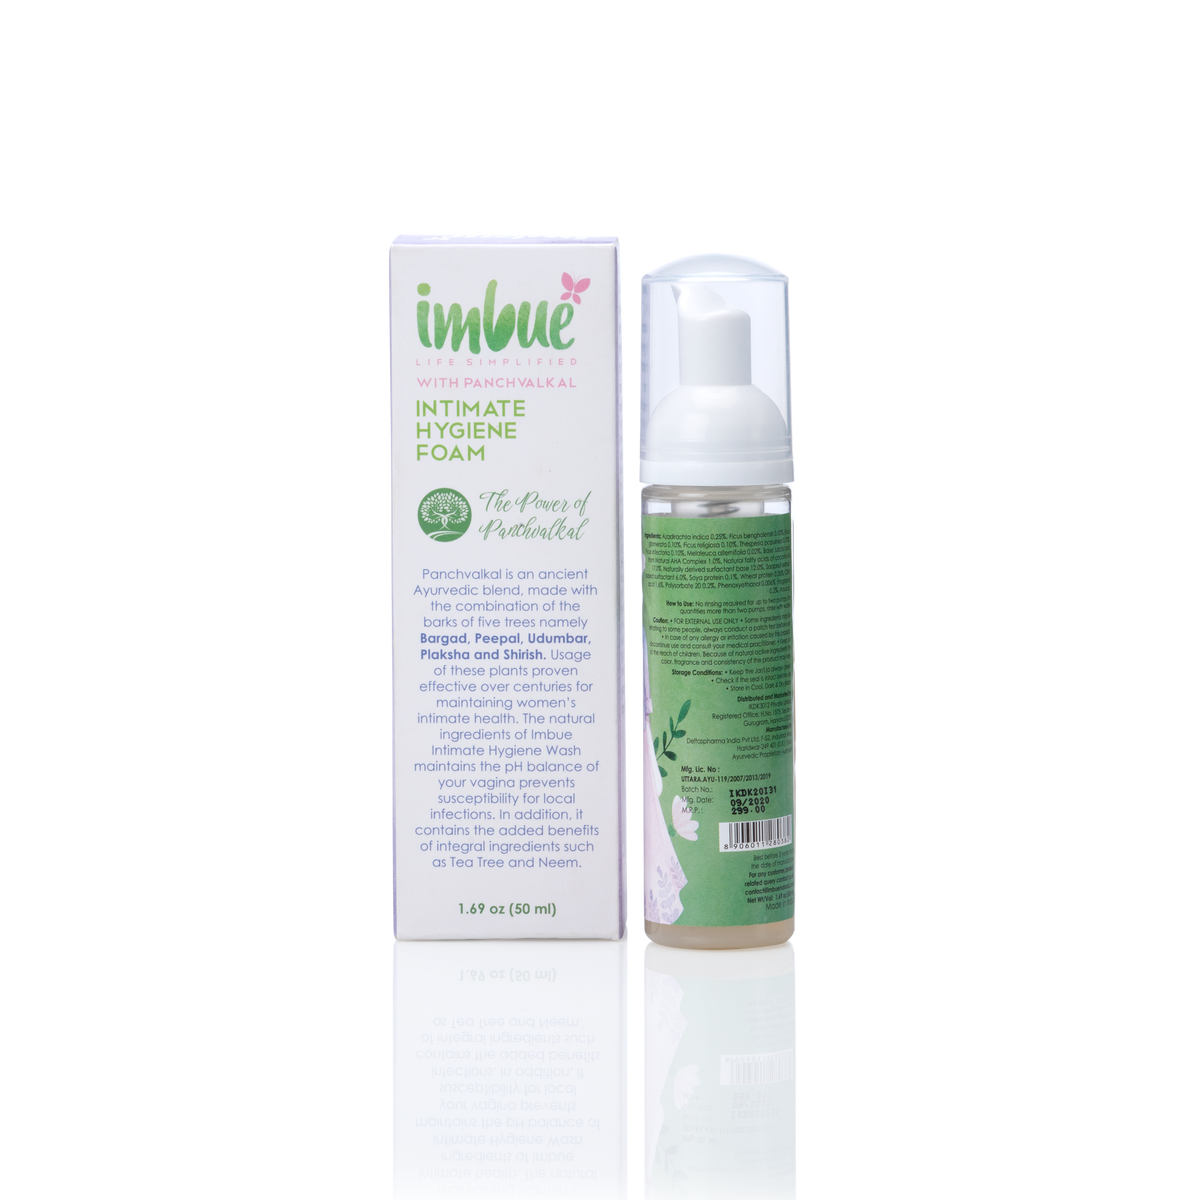 Imbue Natural Intimate Hygiene Vaginal Foam for Women - 50 ml Pack of 2 Combo